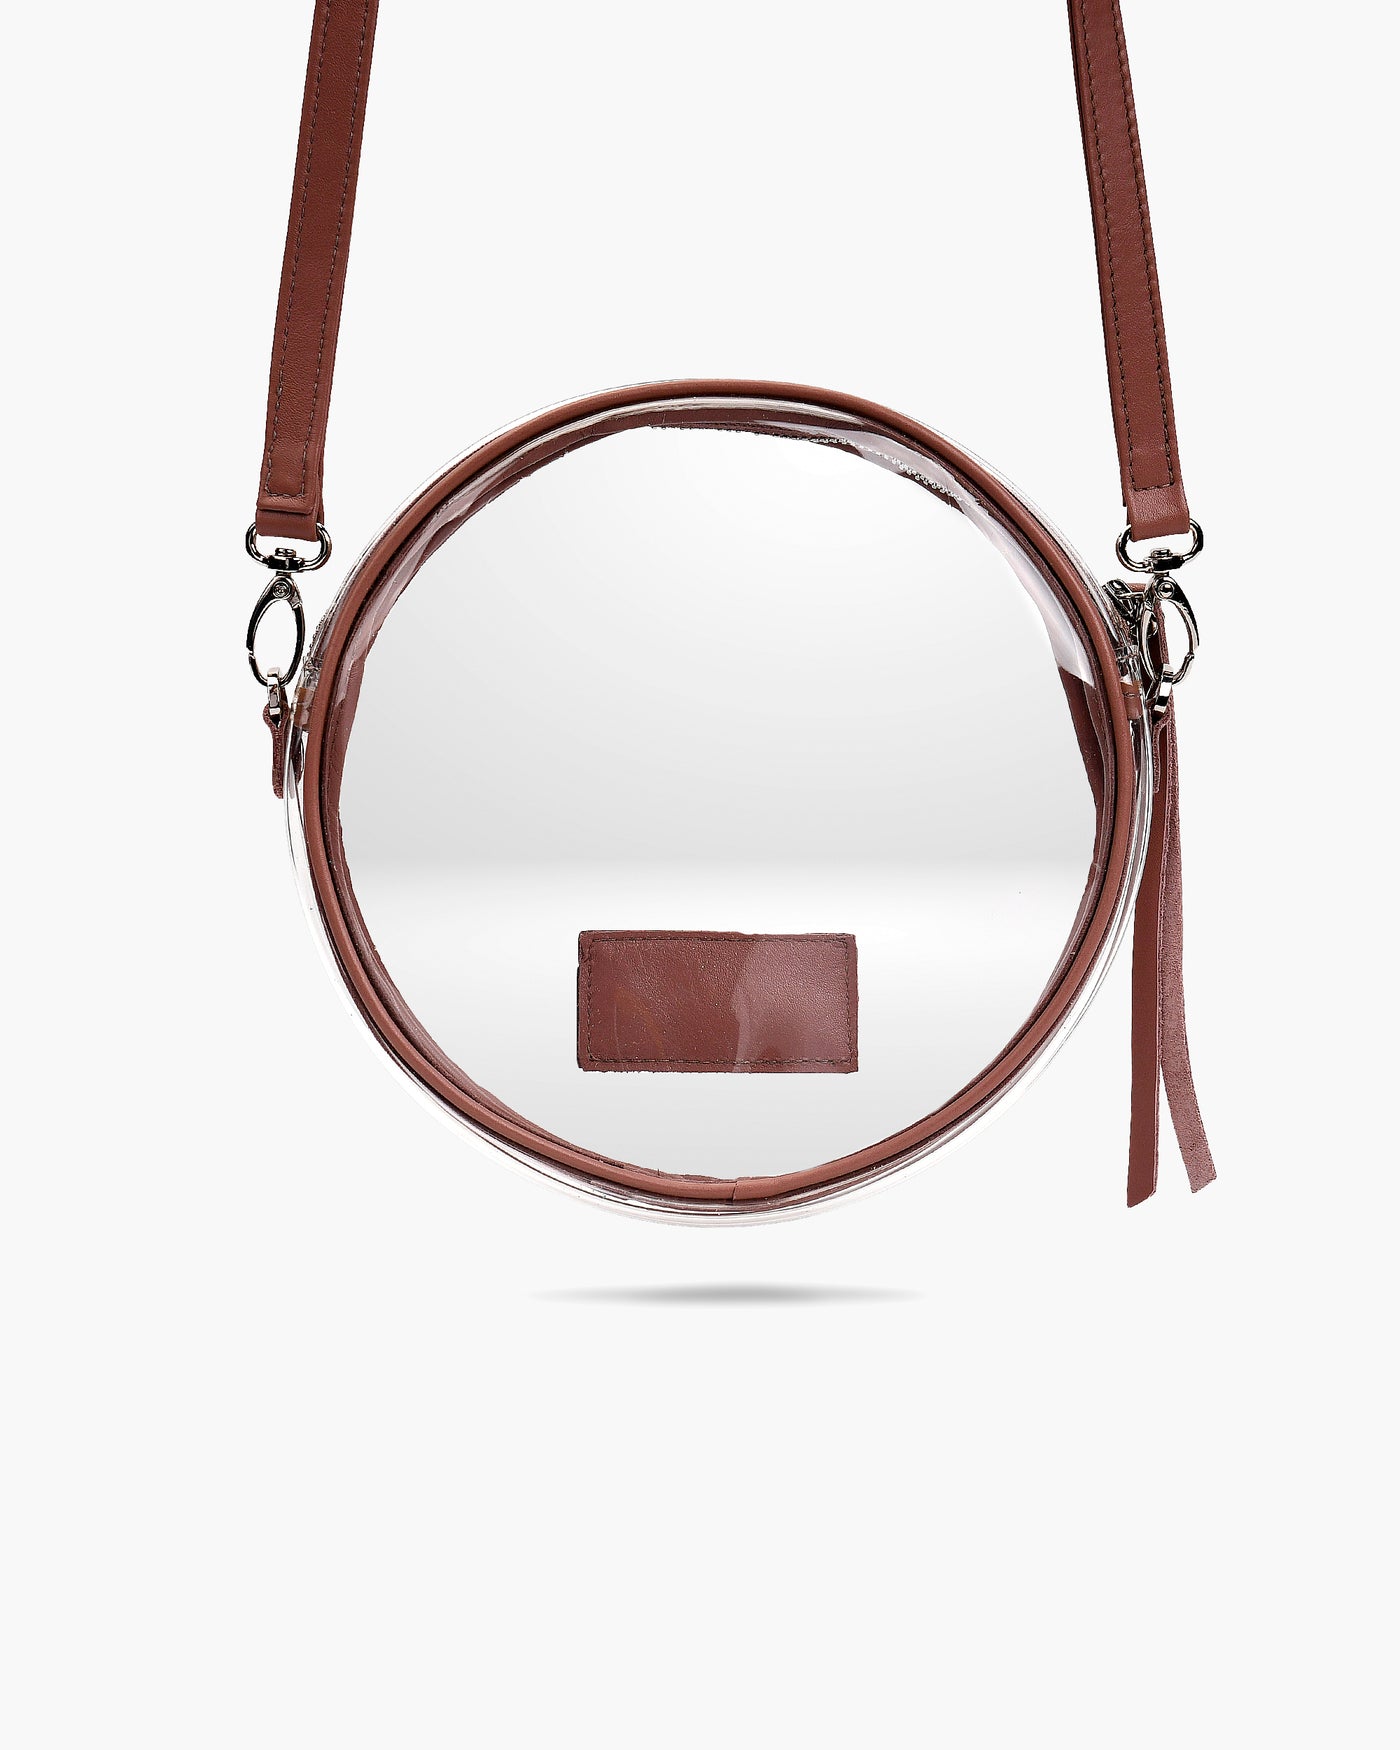 Isabelle Clear Circle Bag - Glicene Isabelle Clear Bag Joey James, The Label   